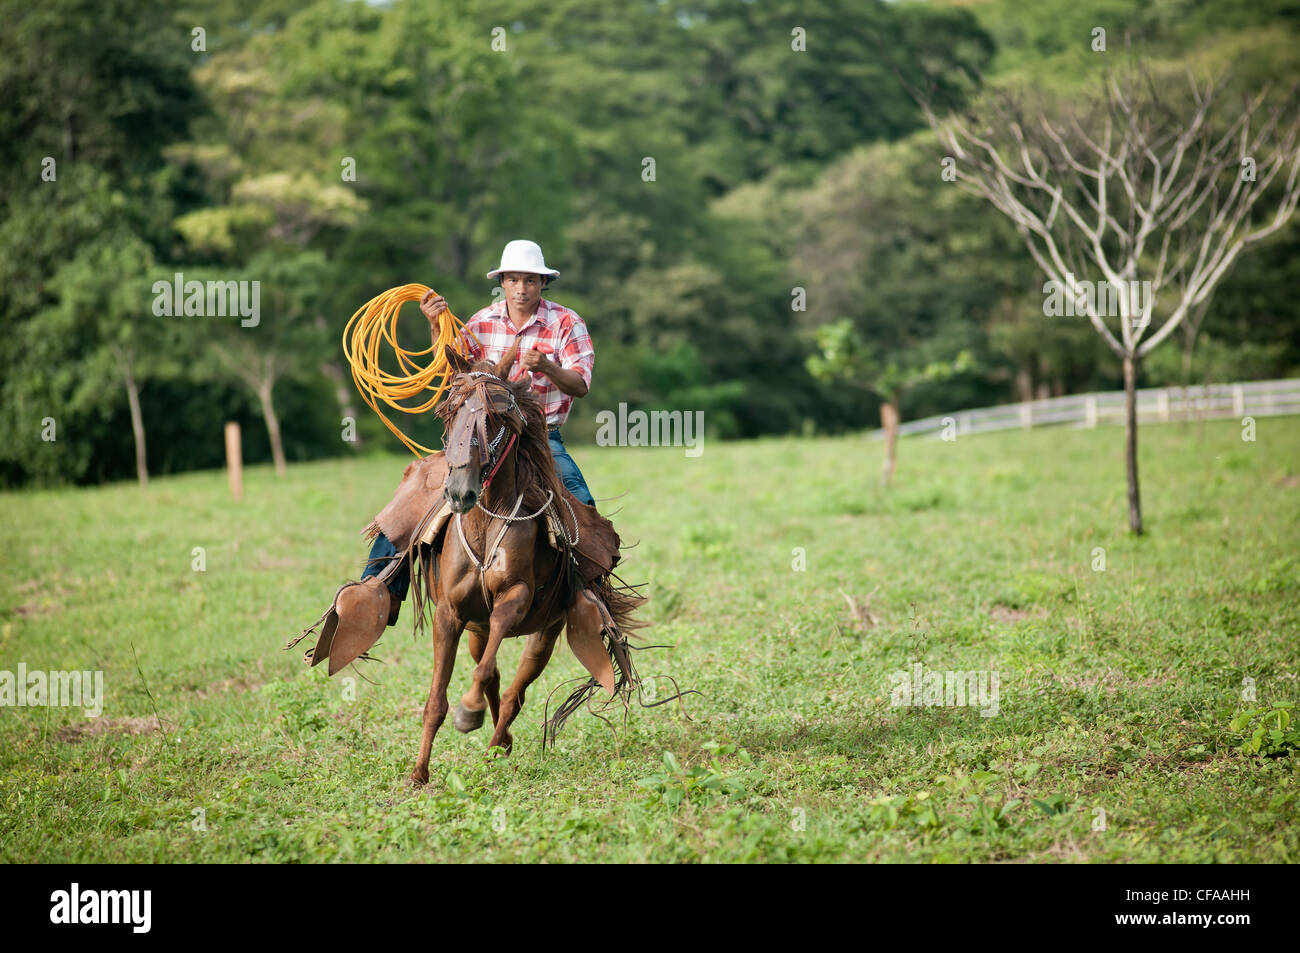 Man with lasso riding horse in field Stock Photo